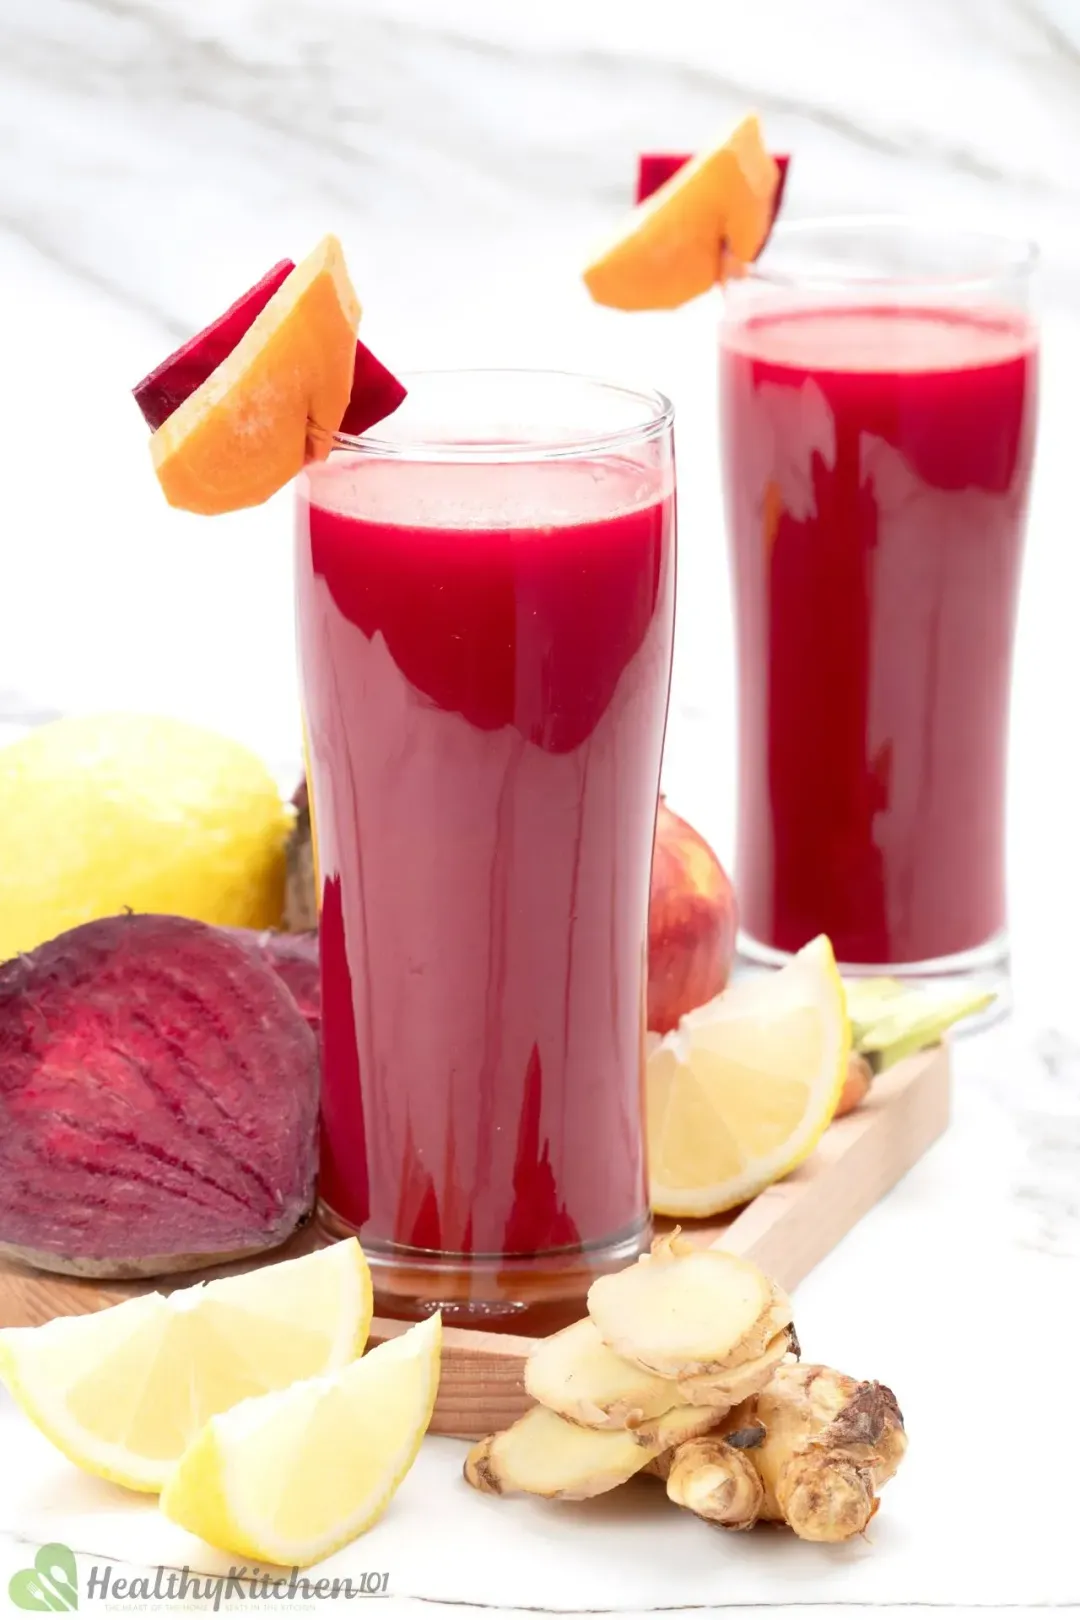 Two tall glasses of beetroot drink garnished with carrot slices, beetroot half, lemon wedges, and ginger knobs